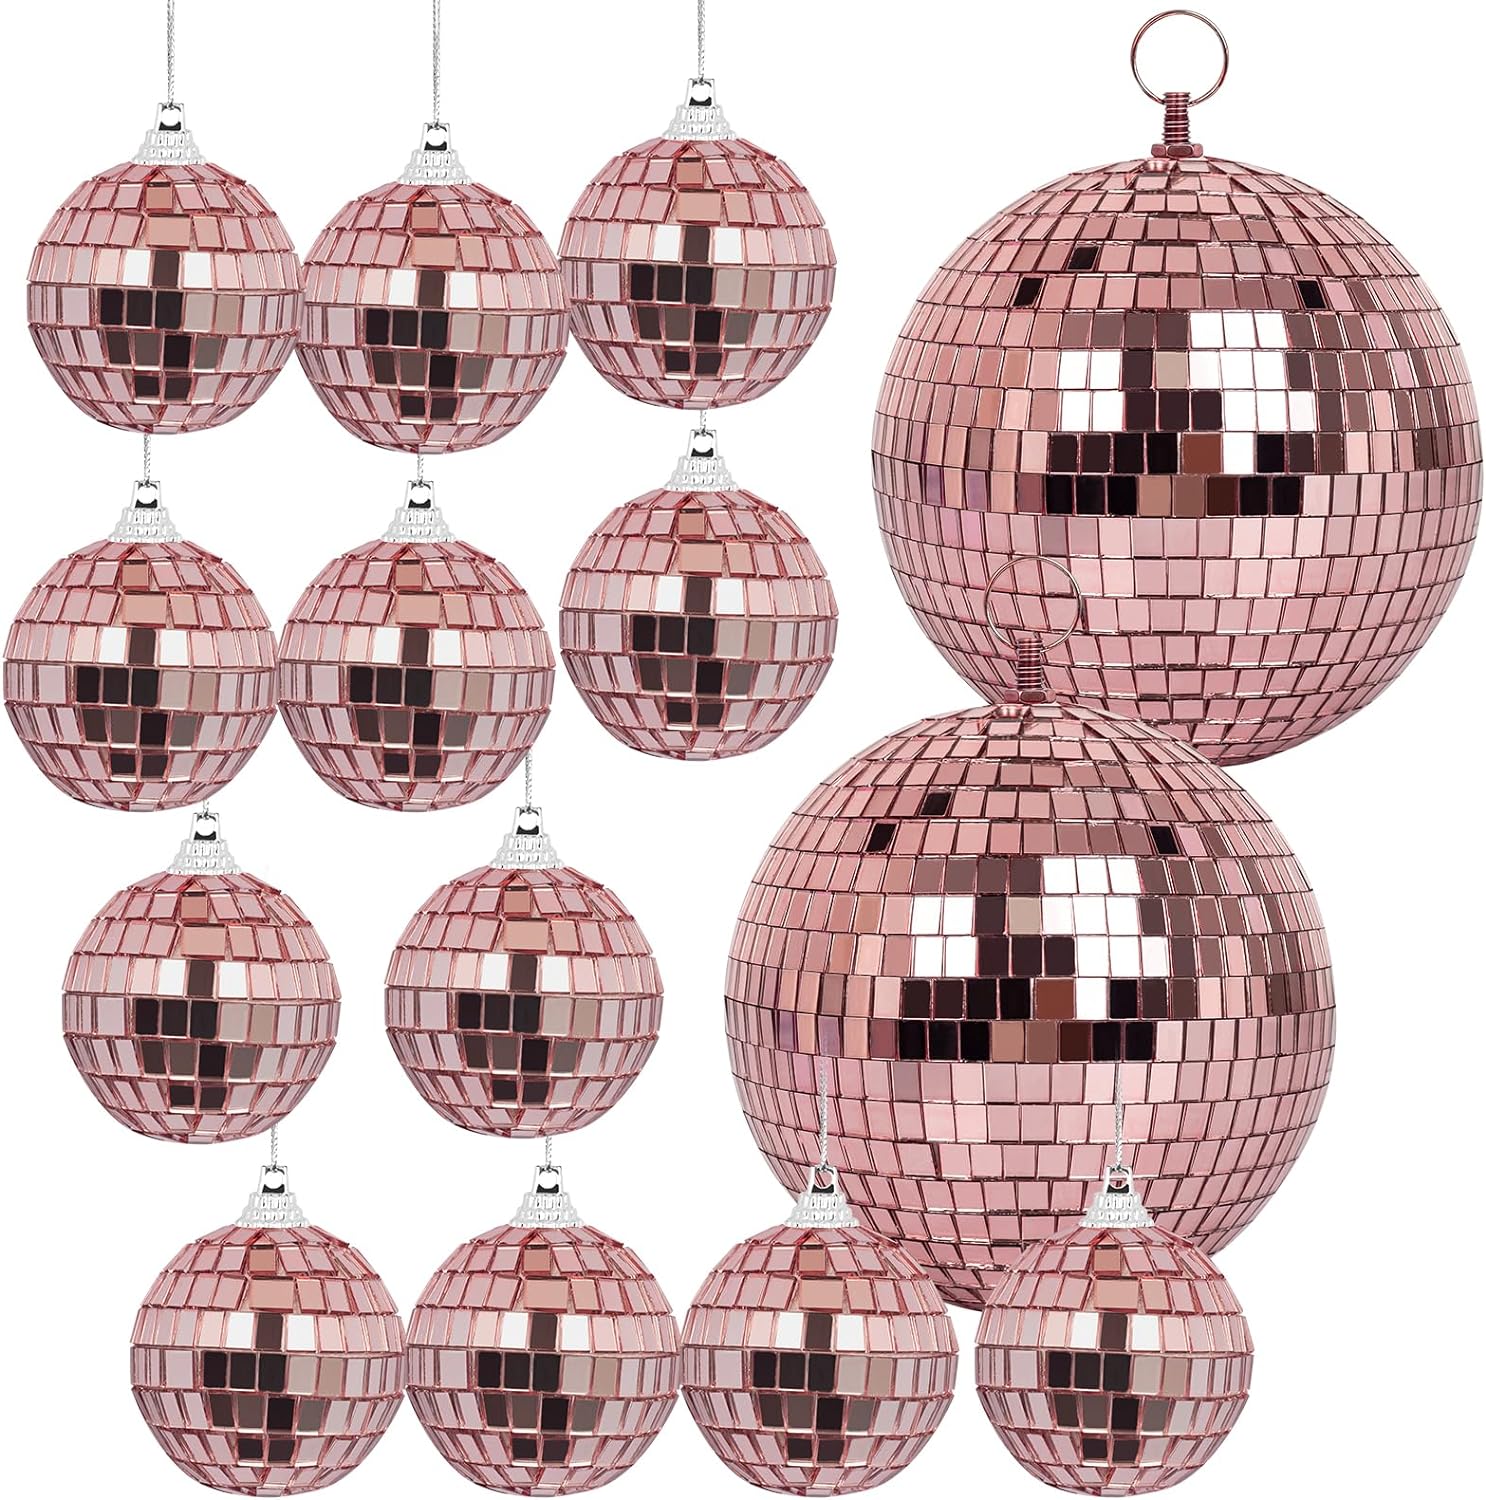 Mirror Balls, MUZTOP 14 Pack Disco Ball Ornaments Hanging Disco Mirror Ball for DJ Stage Club Wedding Holiday Home Party Decor, 6 Inch, 2 Inch (Rose Gold)